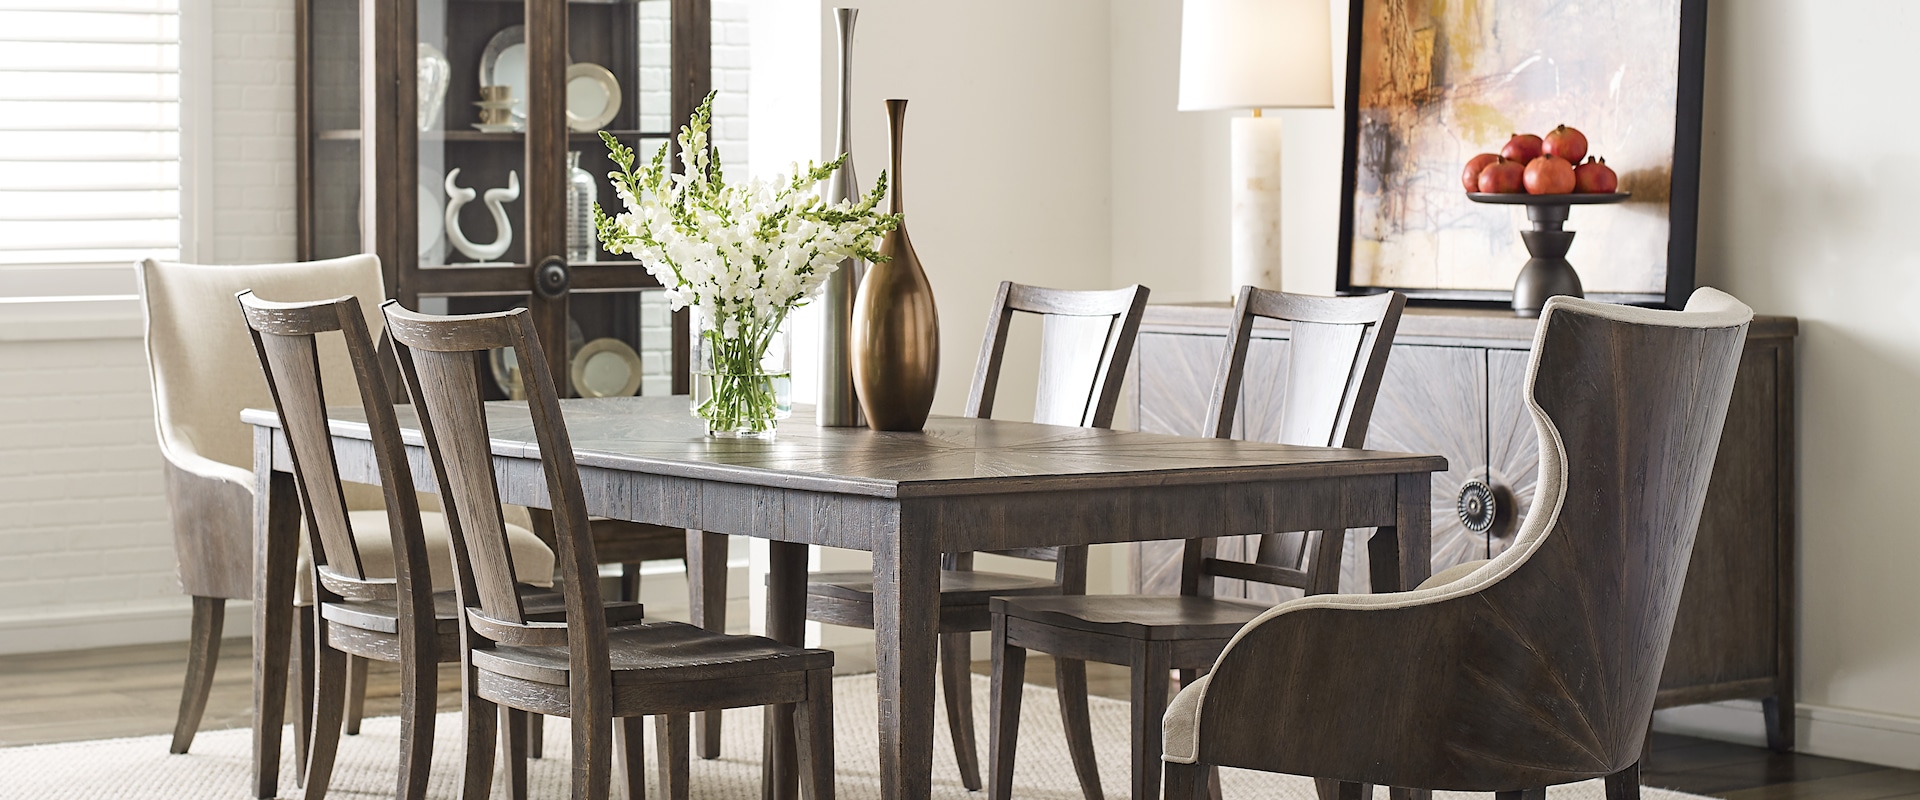 Transitional 7-Piece Rectangular Dining Set with Upholstered Host Chairs